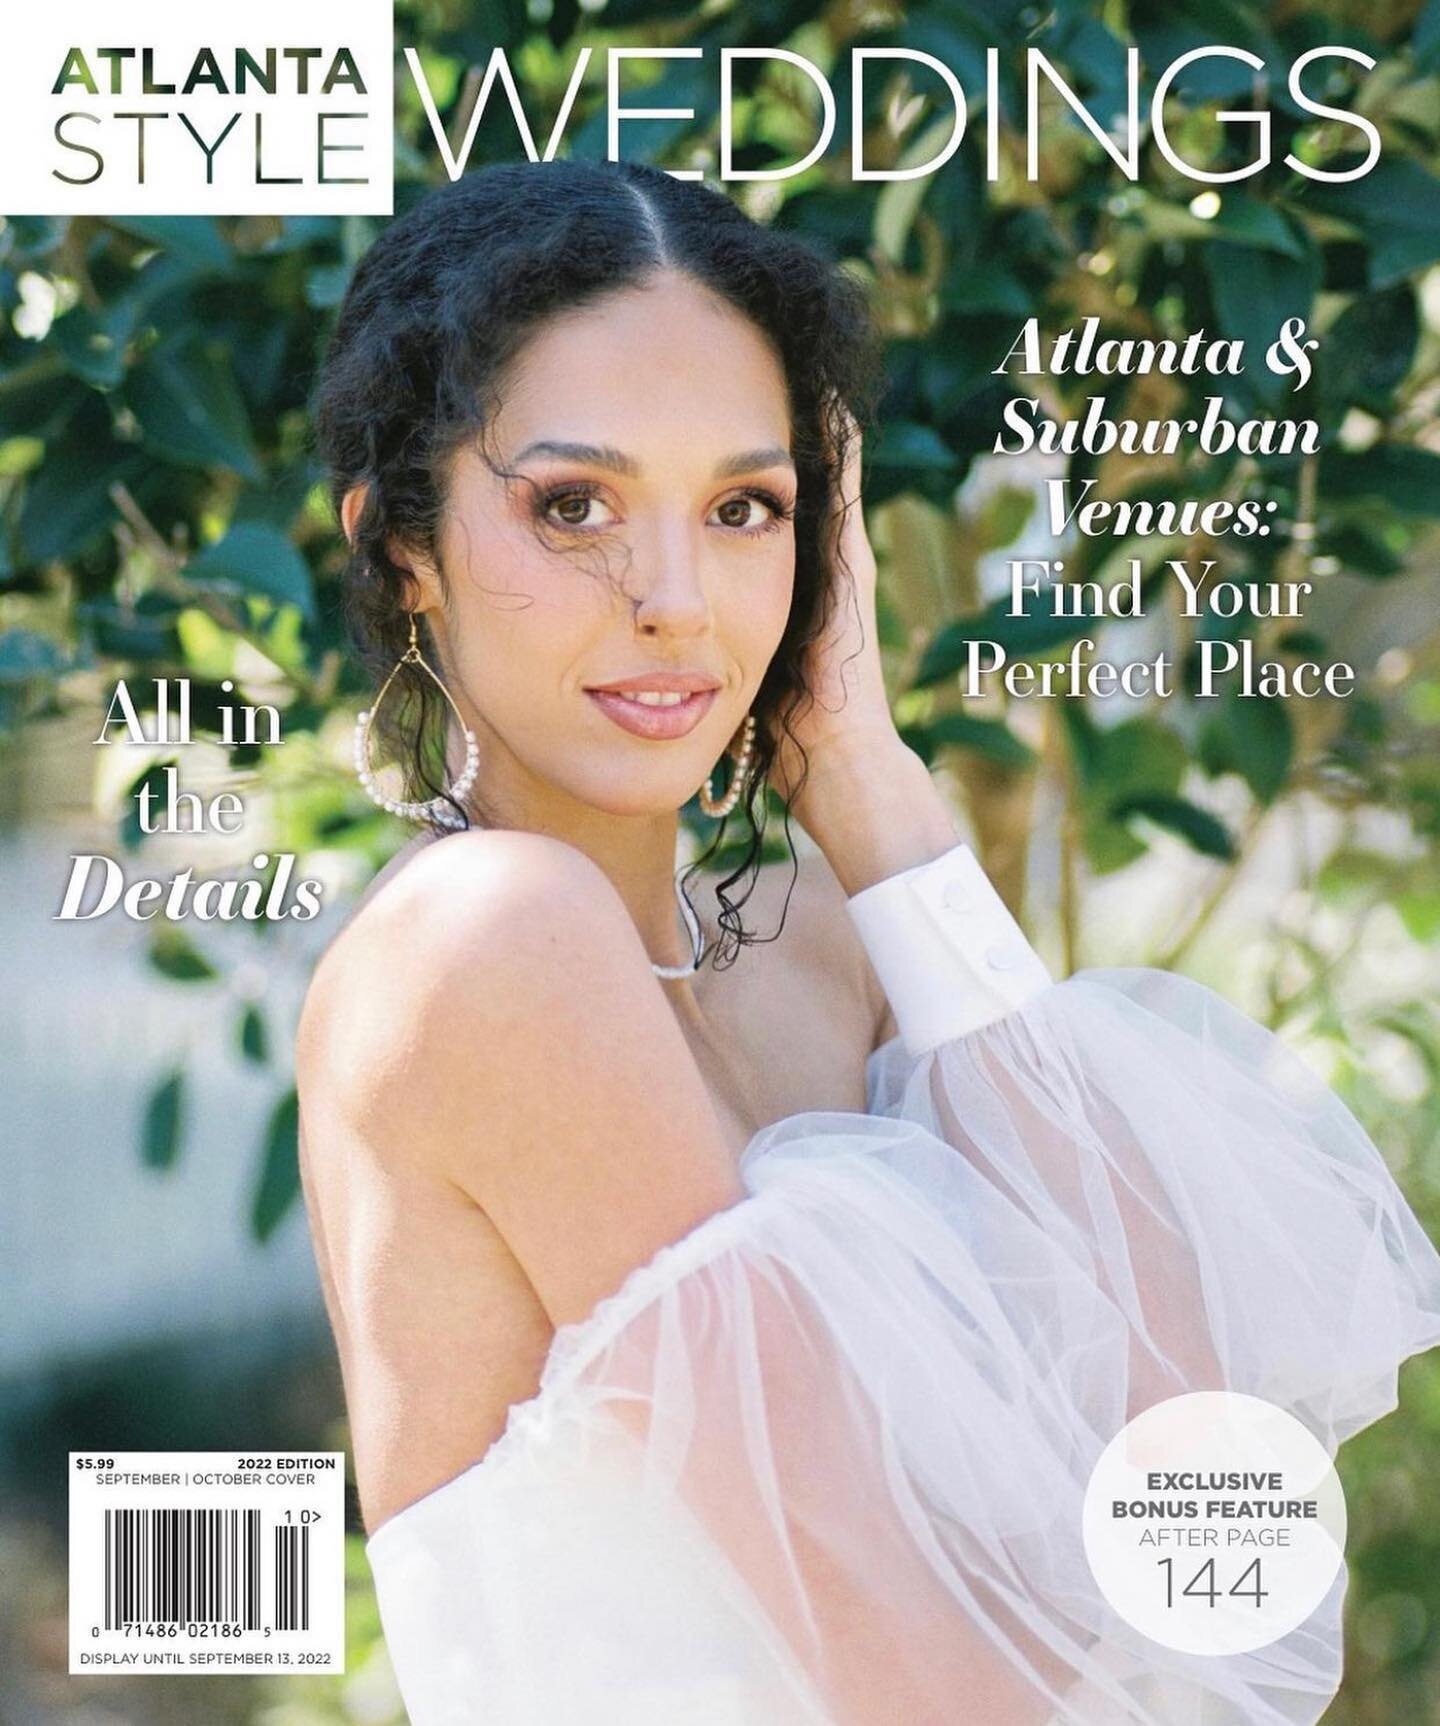 🦋Cover alert 🦋 The Wildflower 301, along with an incredible vendor team, was featured on the cover of @atlantastyleweddings 

This stunning inspiration shoot was photographed early in the year so you can see what early spring looks like in the gard